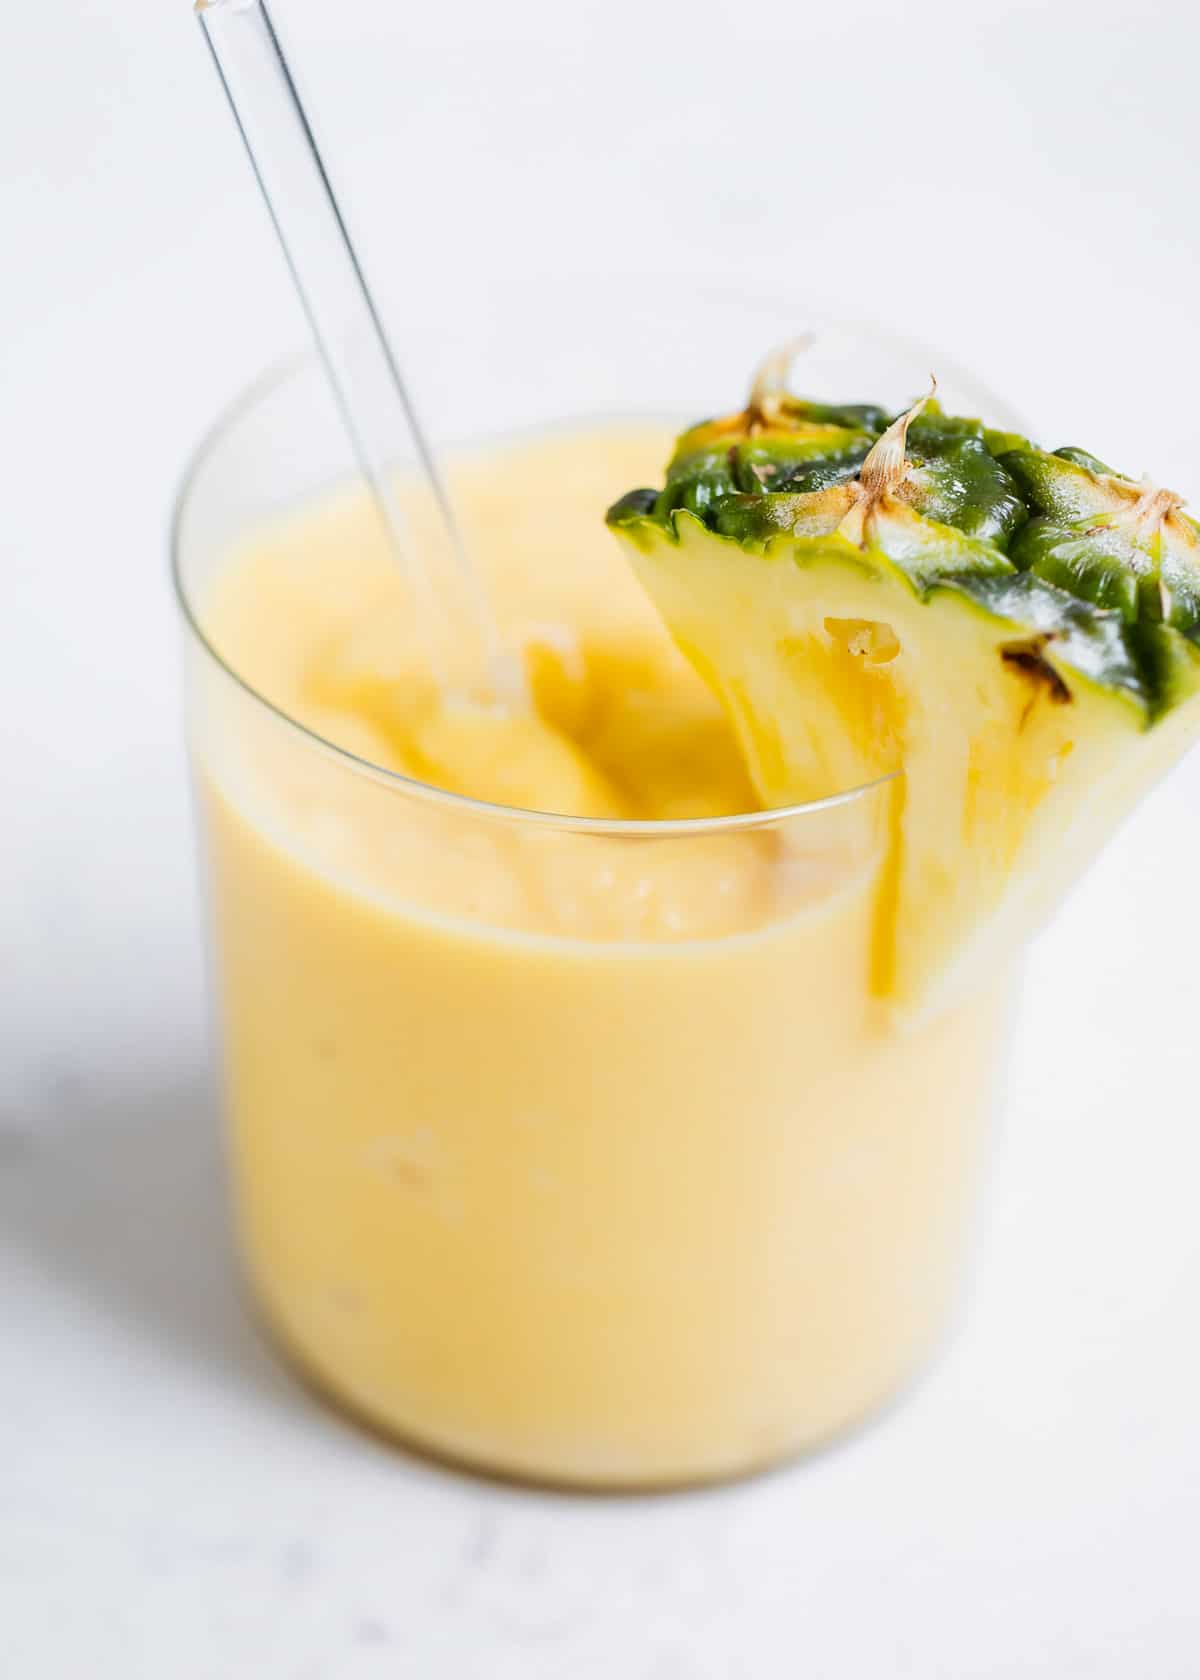 Pineapple smoothie in glass cup with pineapple slice.